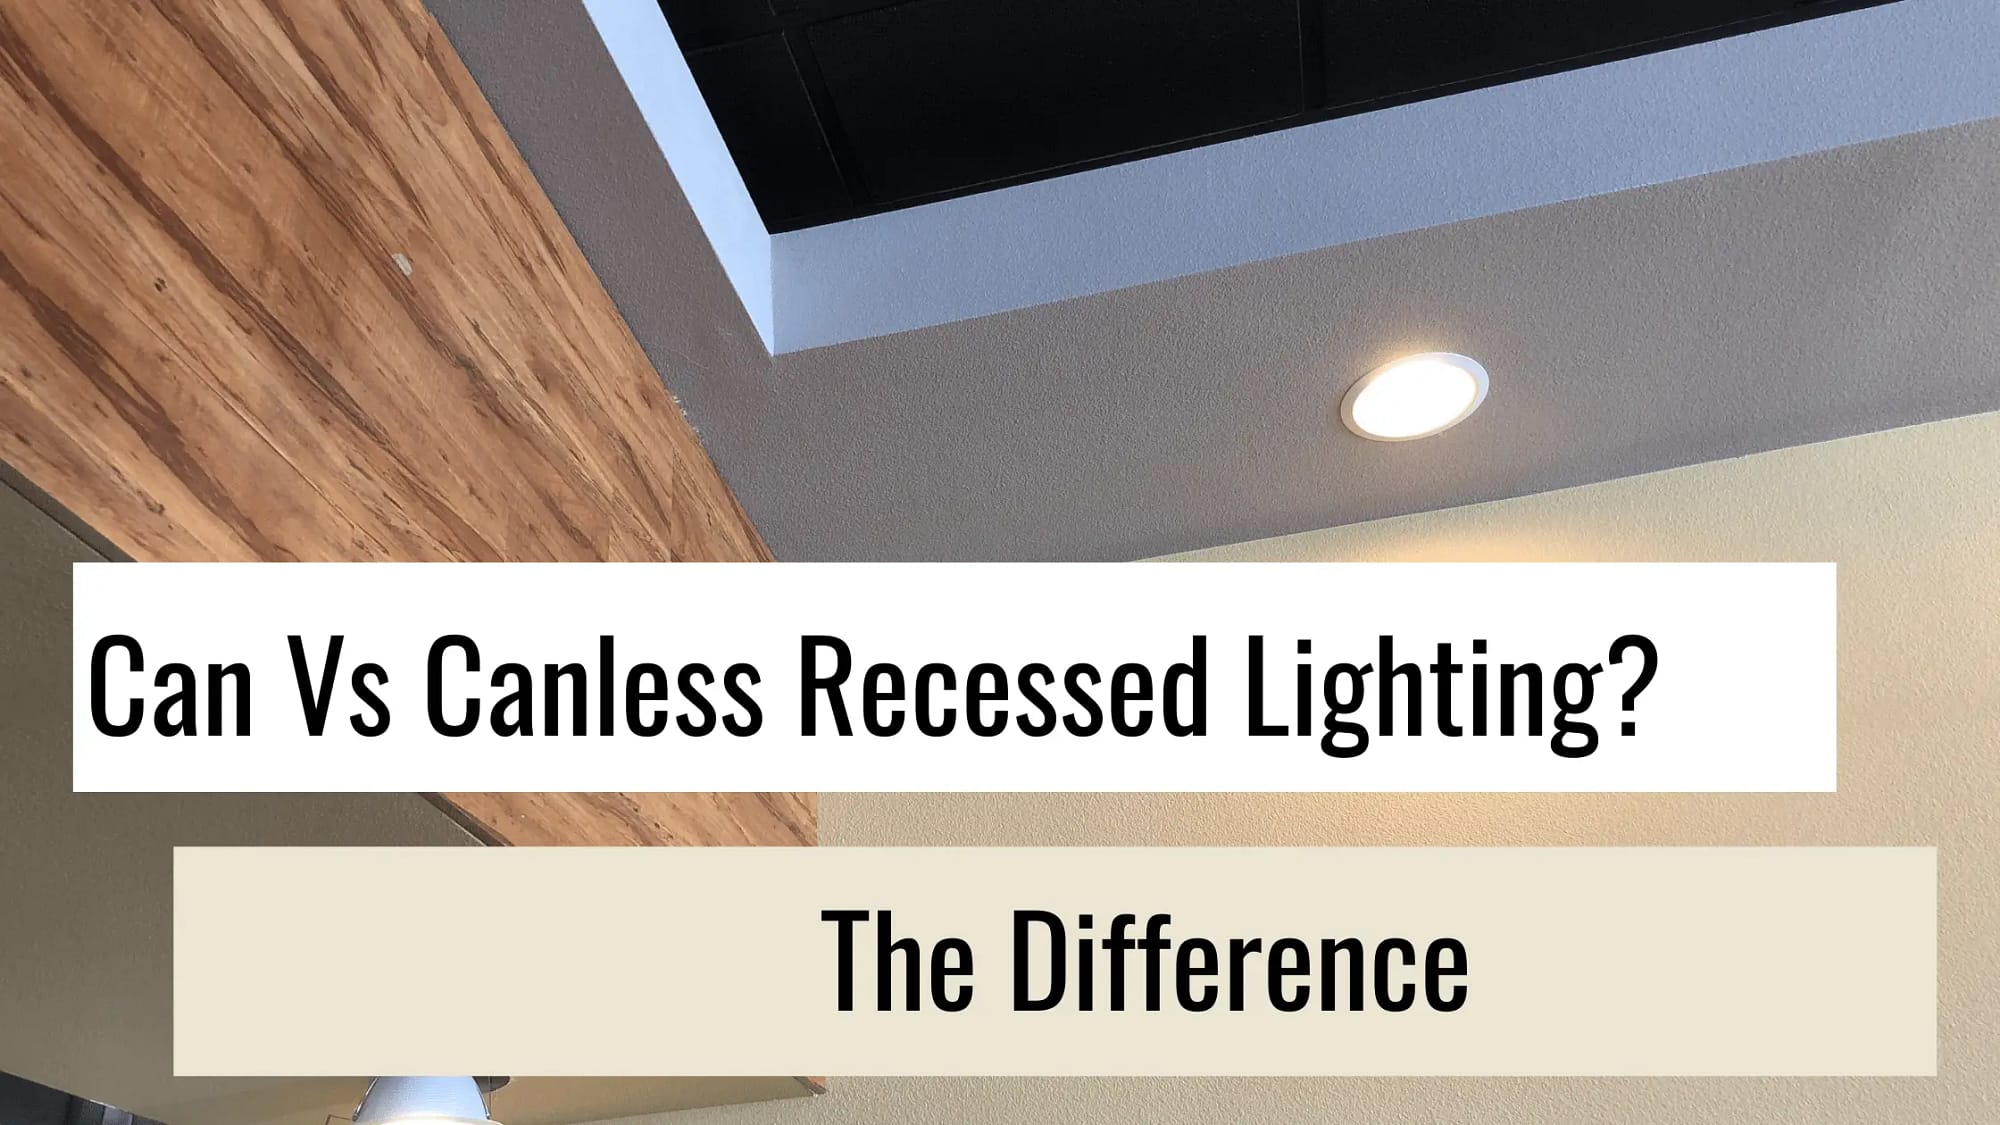 Can Vs Canless Recessed Lighting?